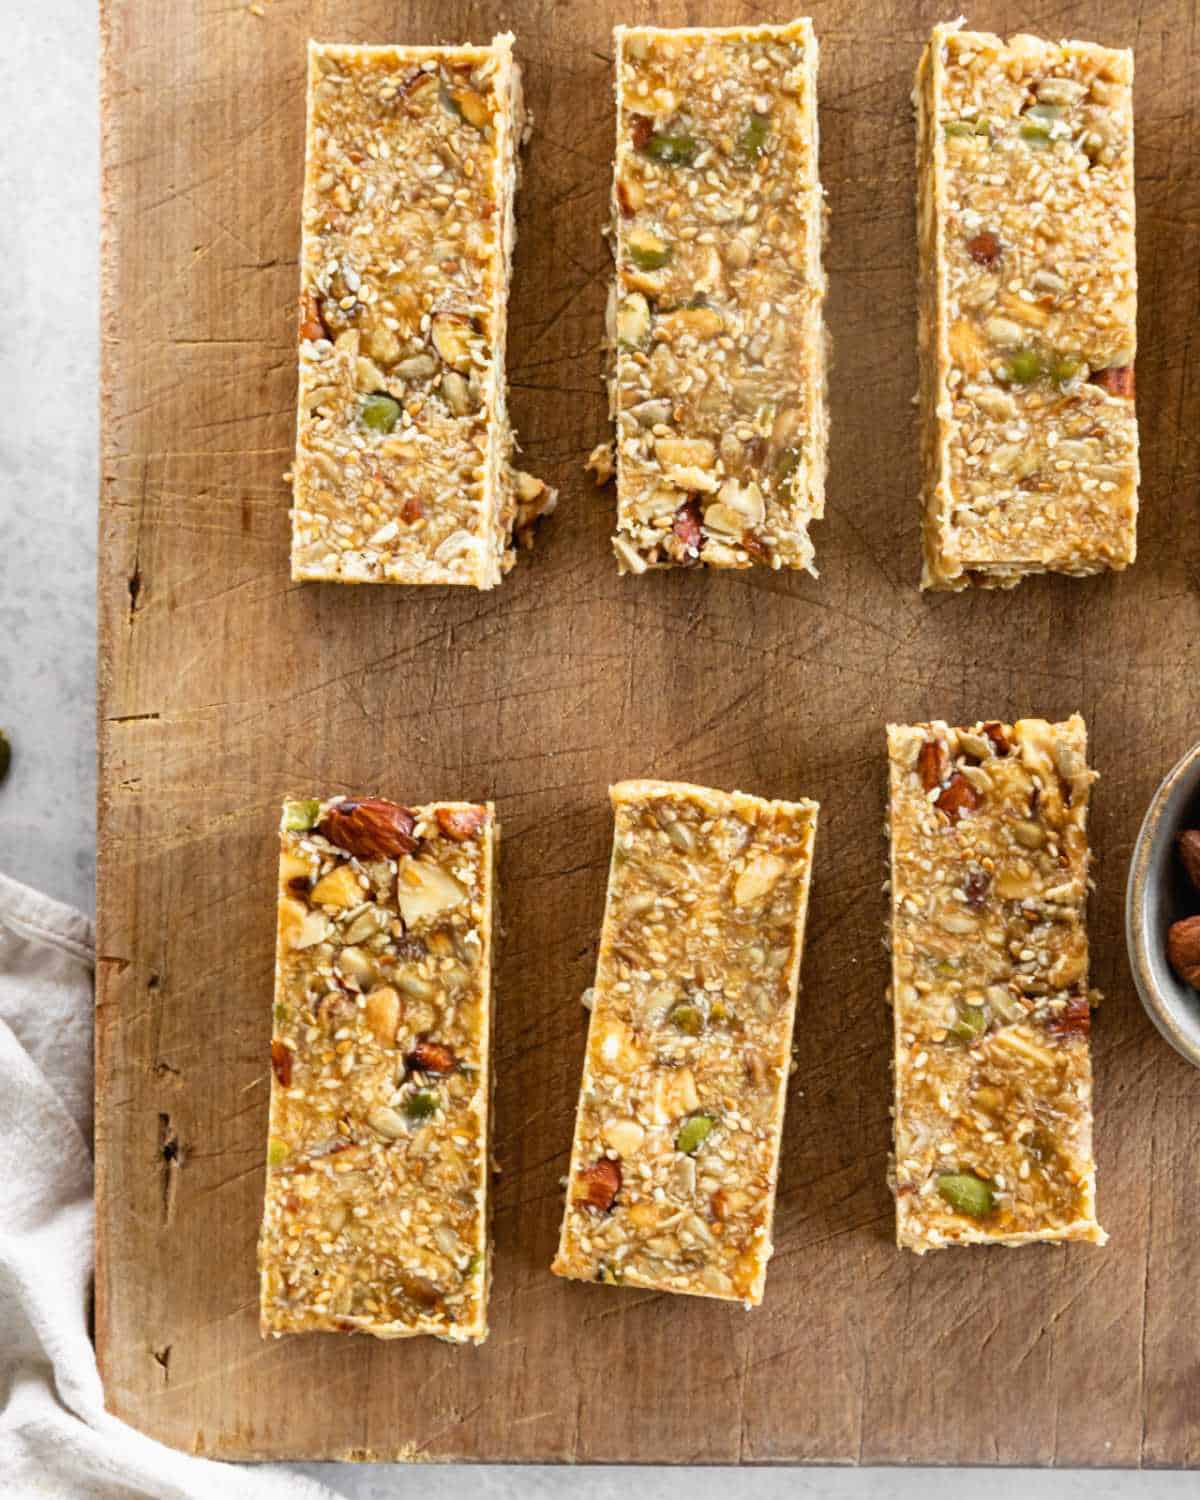 6 Nuts and seeds muesli bars on a wooden chopping board.